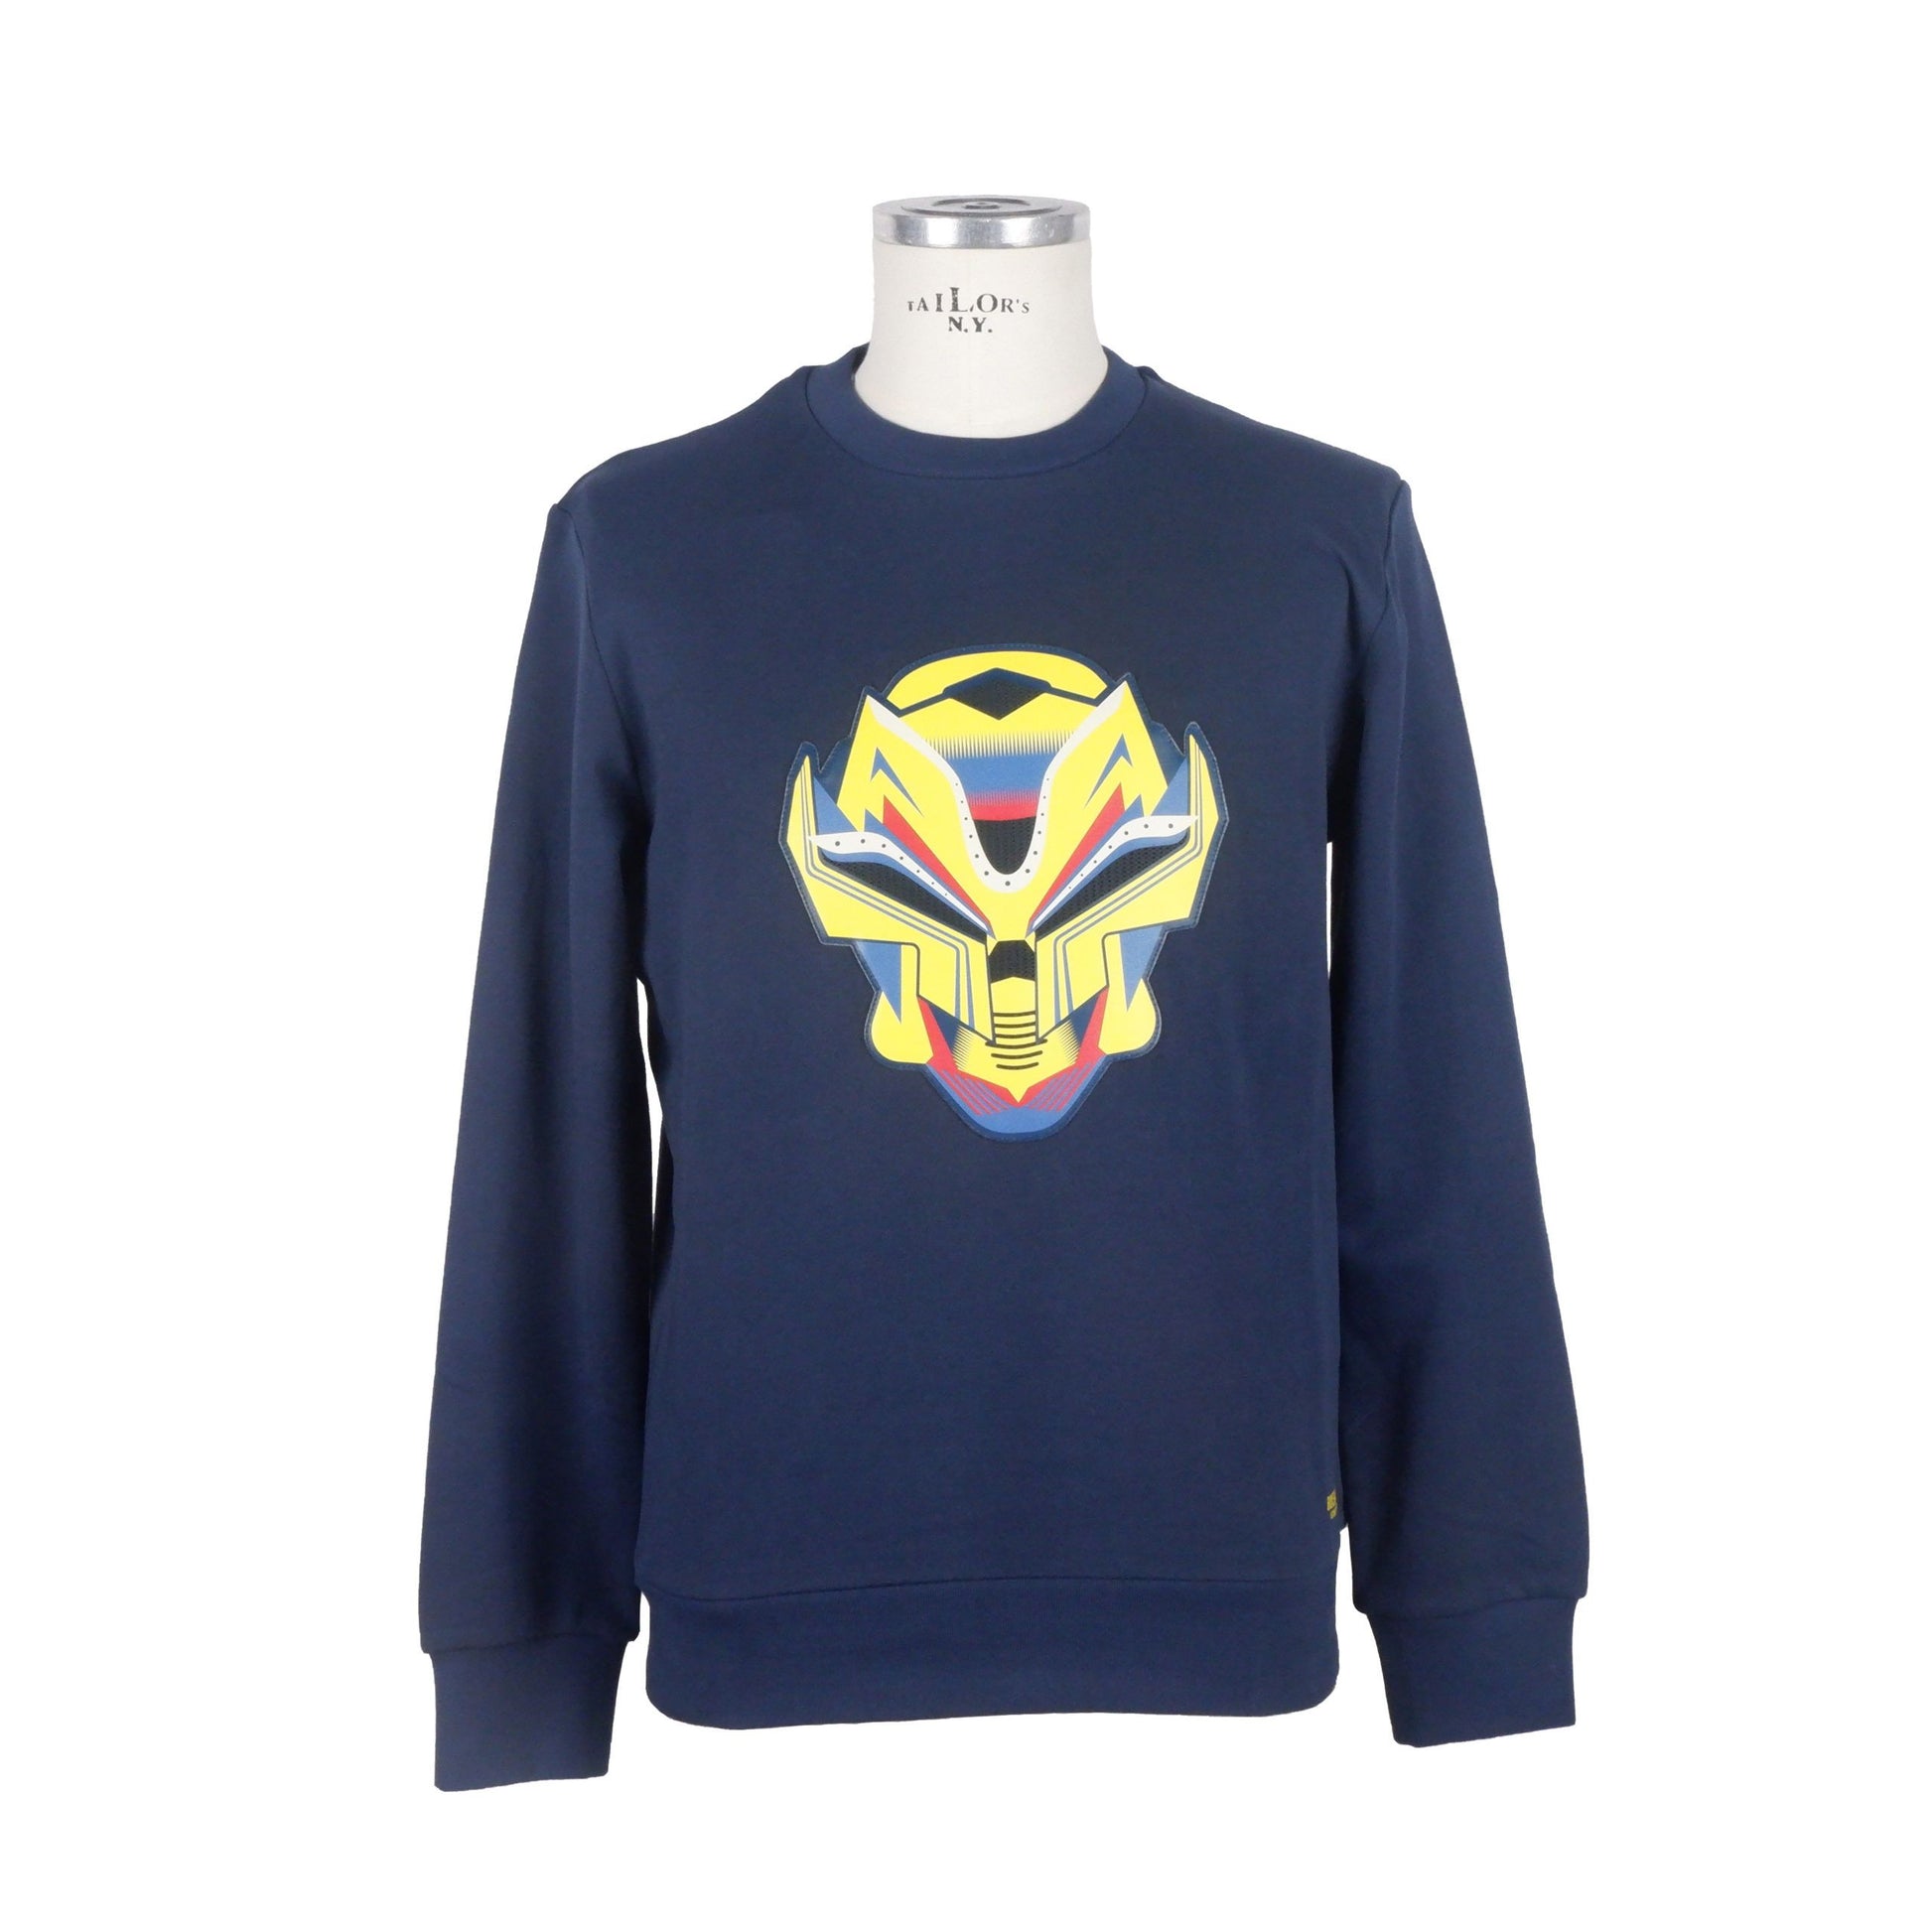 Bikkembergs Men's Blue Cotton Print Sweater - Designed by Bikkembergs Available to Buy at a Discounted Price on Moon Behind The Hill Online Designer Discount Store